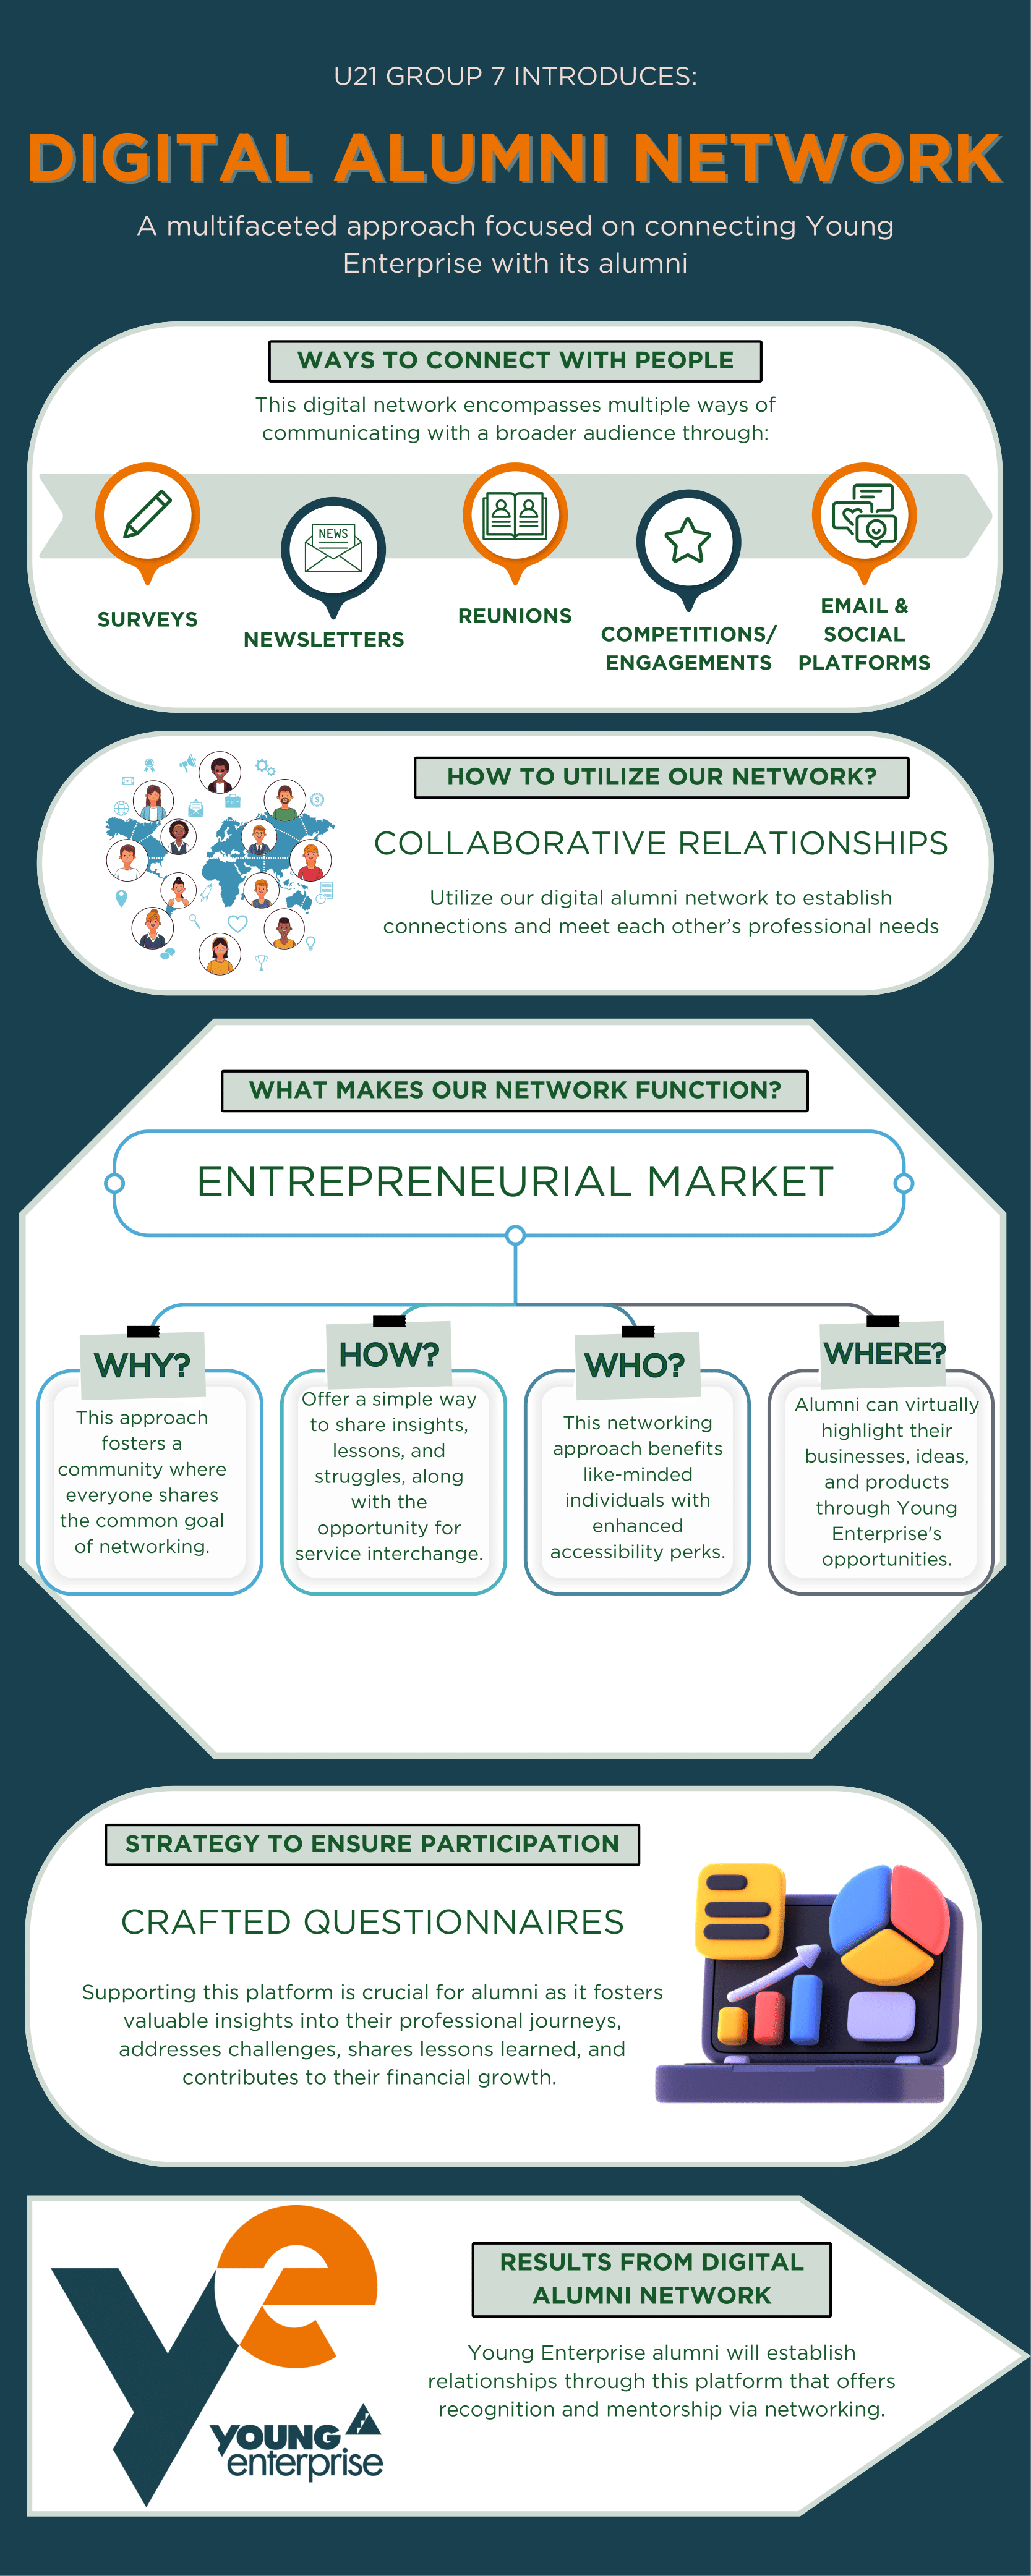 A poster for Mariam's group's idea to connect alumni with young enterprise